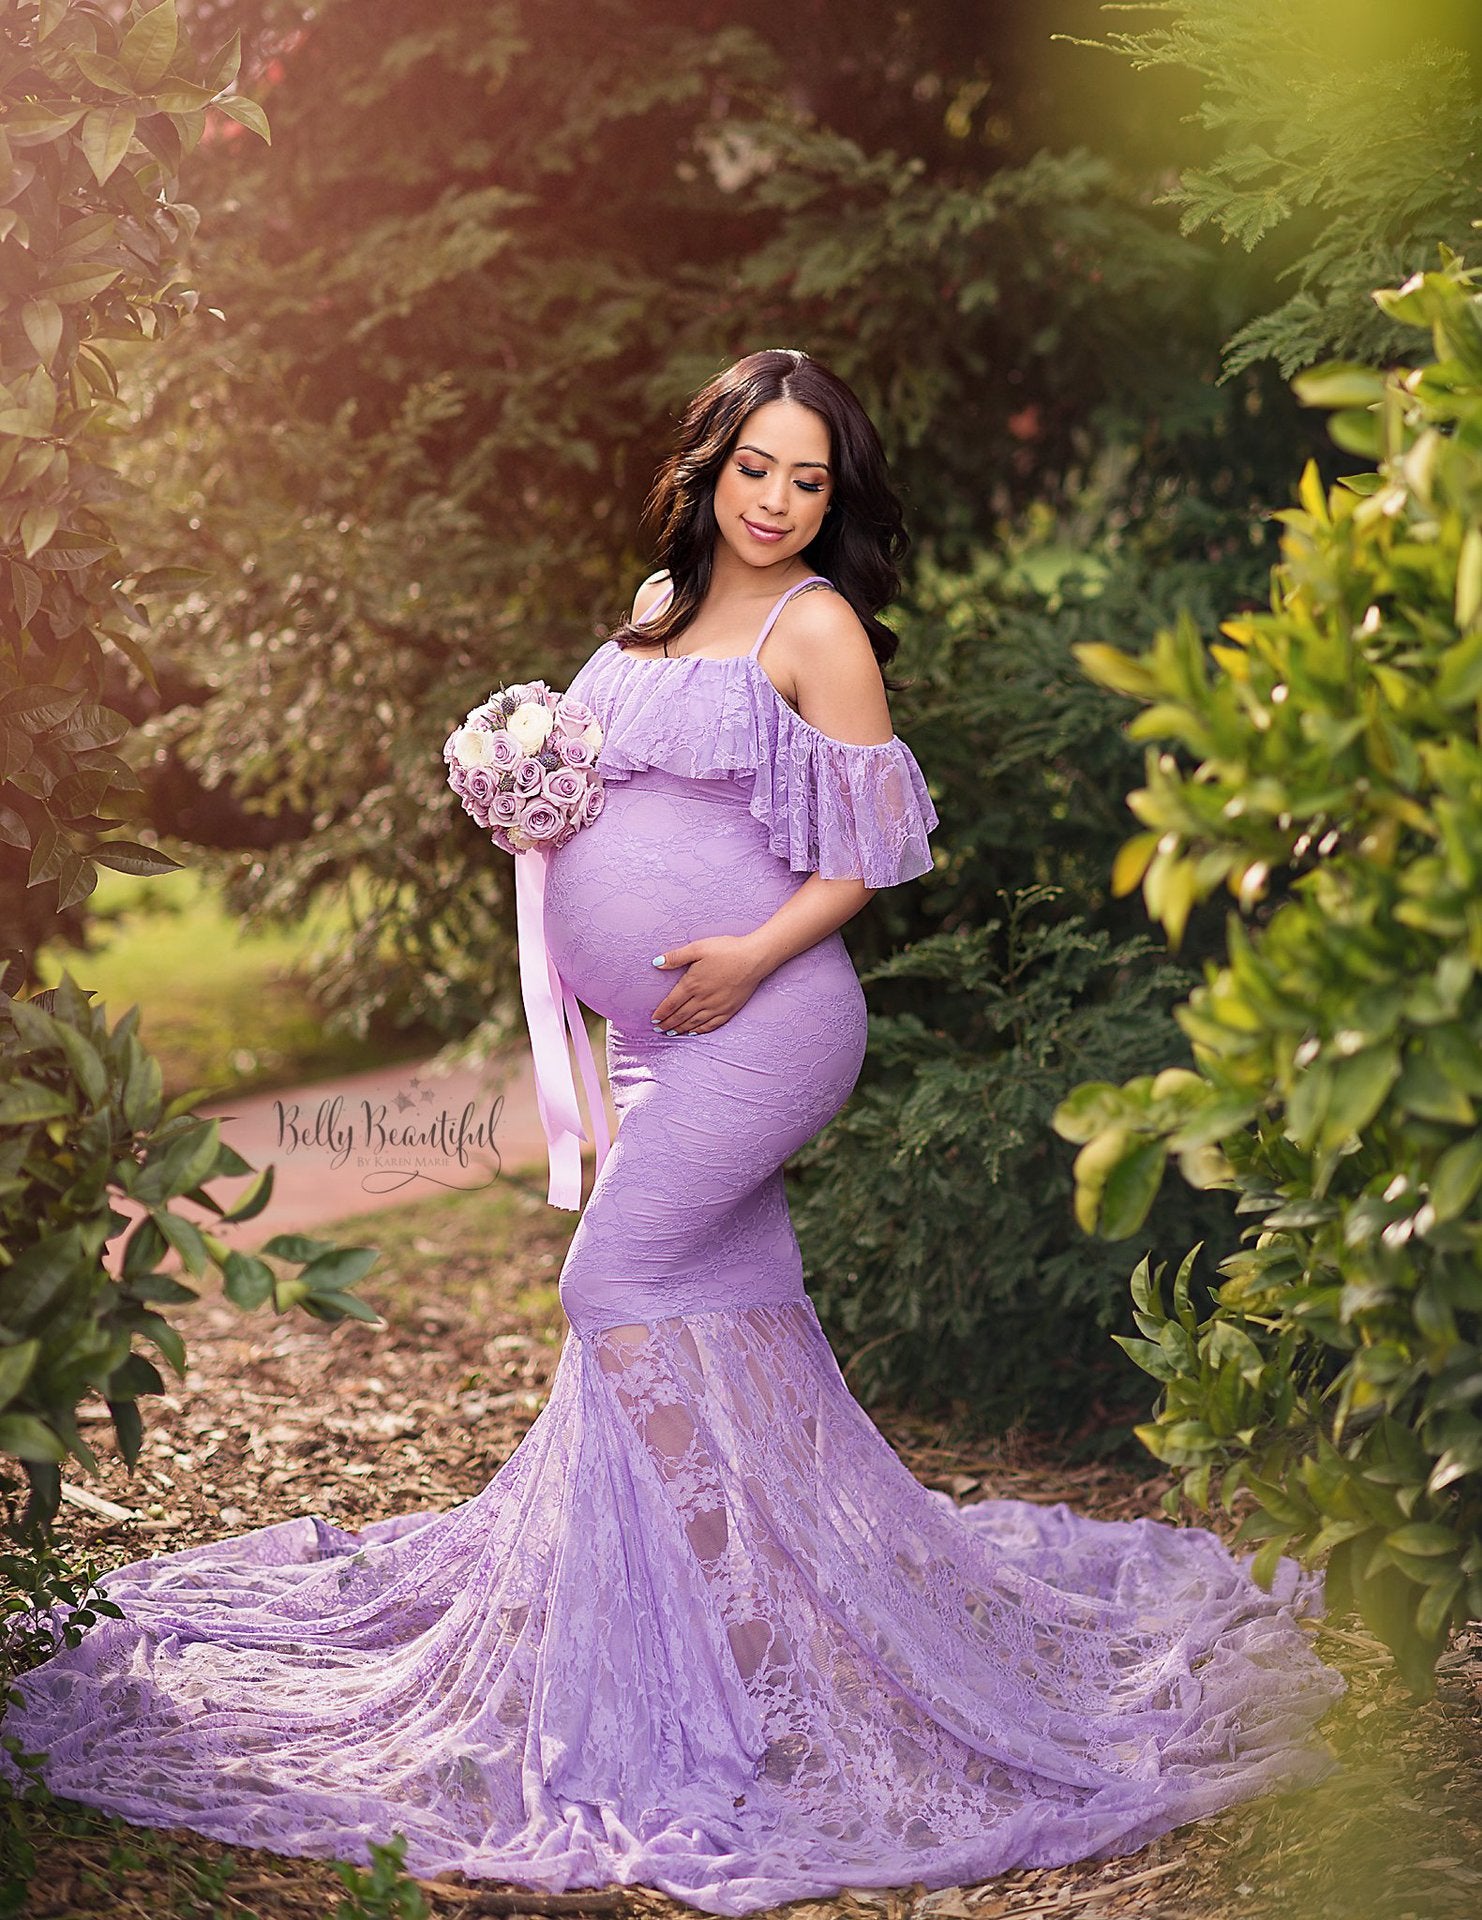 Allover lace maternity dress for a maternity photoshoot